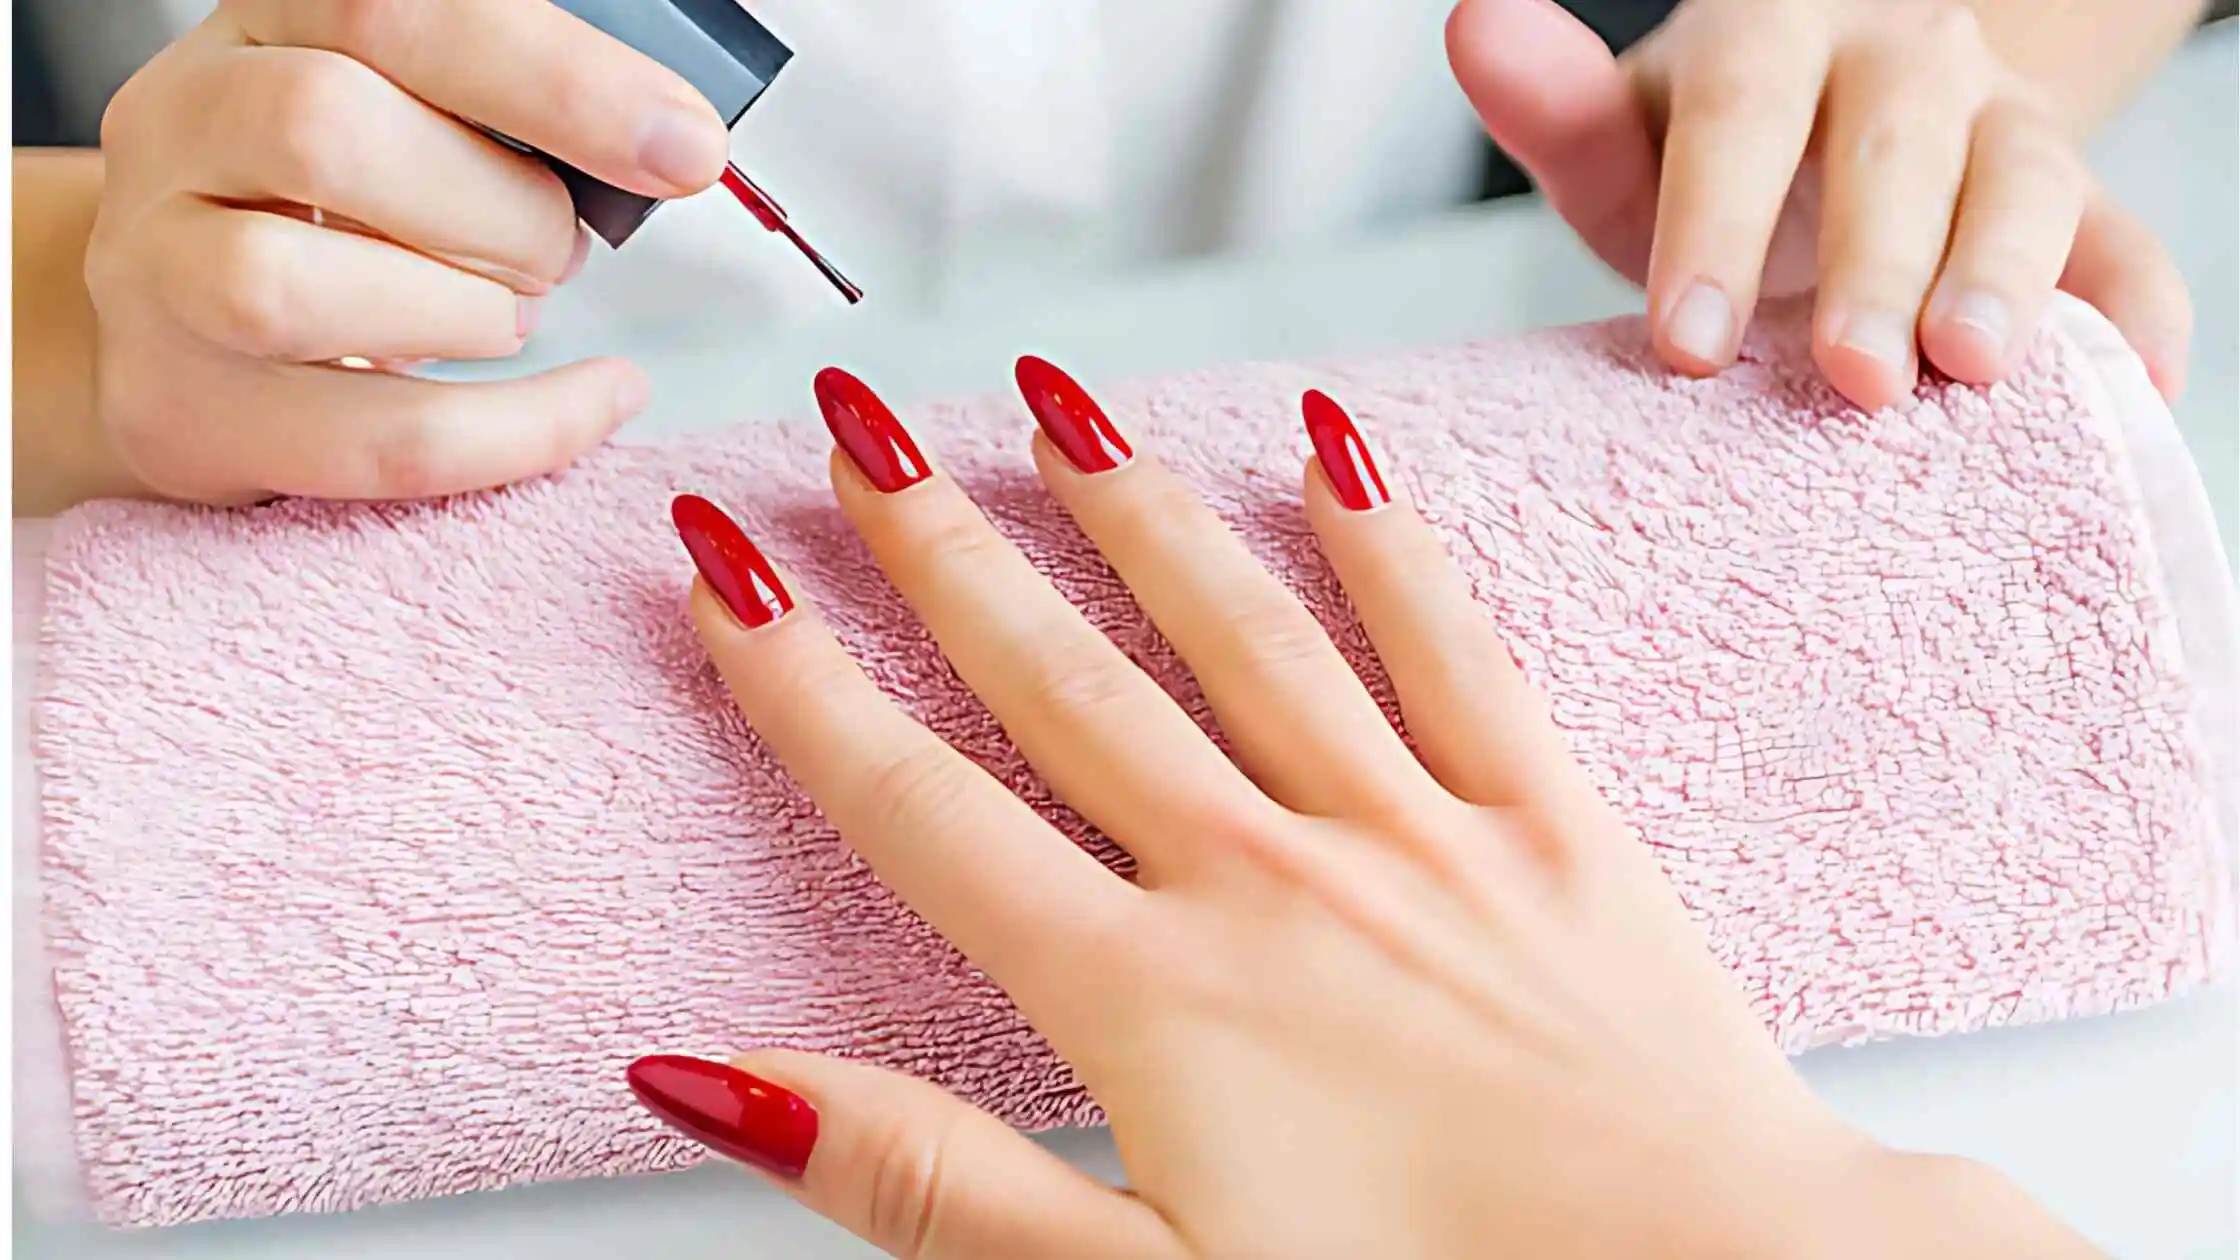 How Much Does It Cost To Get Your Nails Done?